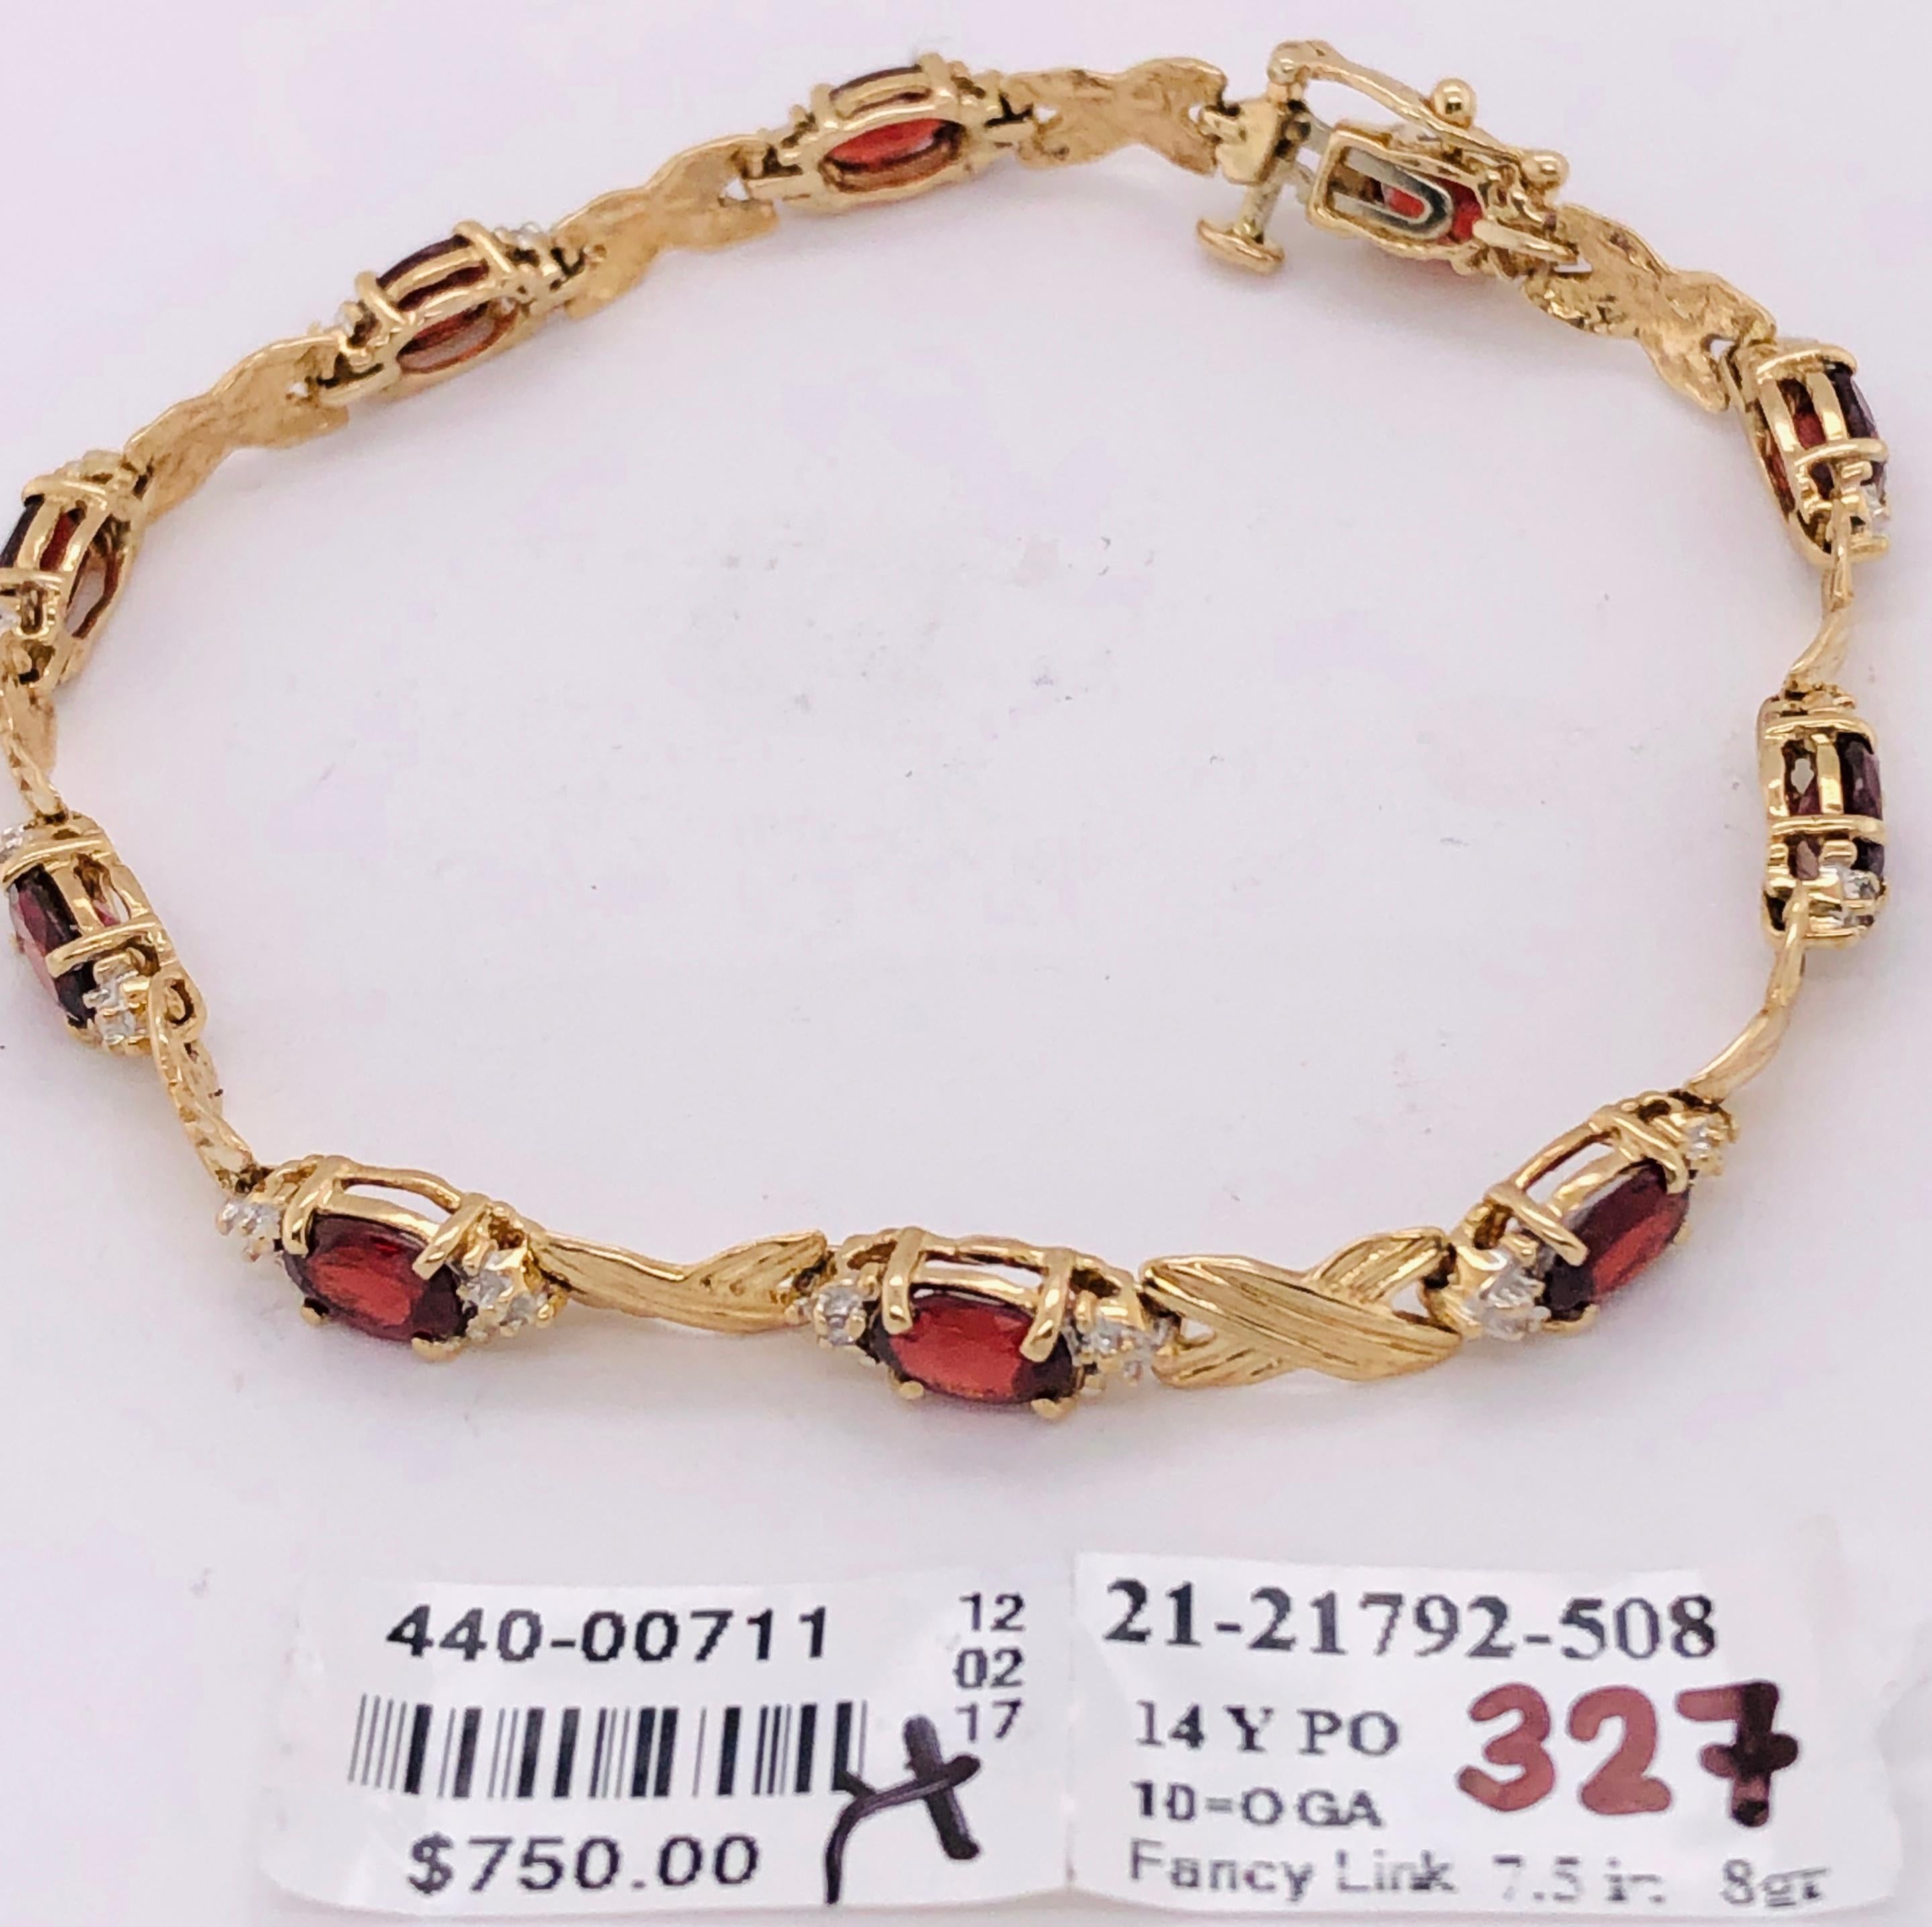 14 Kt Yellow Gold Braided LInk Bracelet With Garnets And Diamond Accents
8 grams total weight.